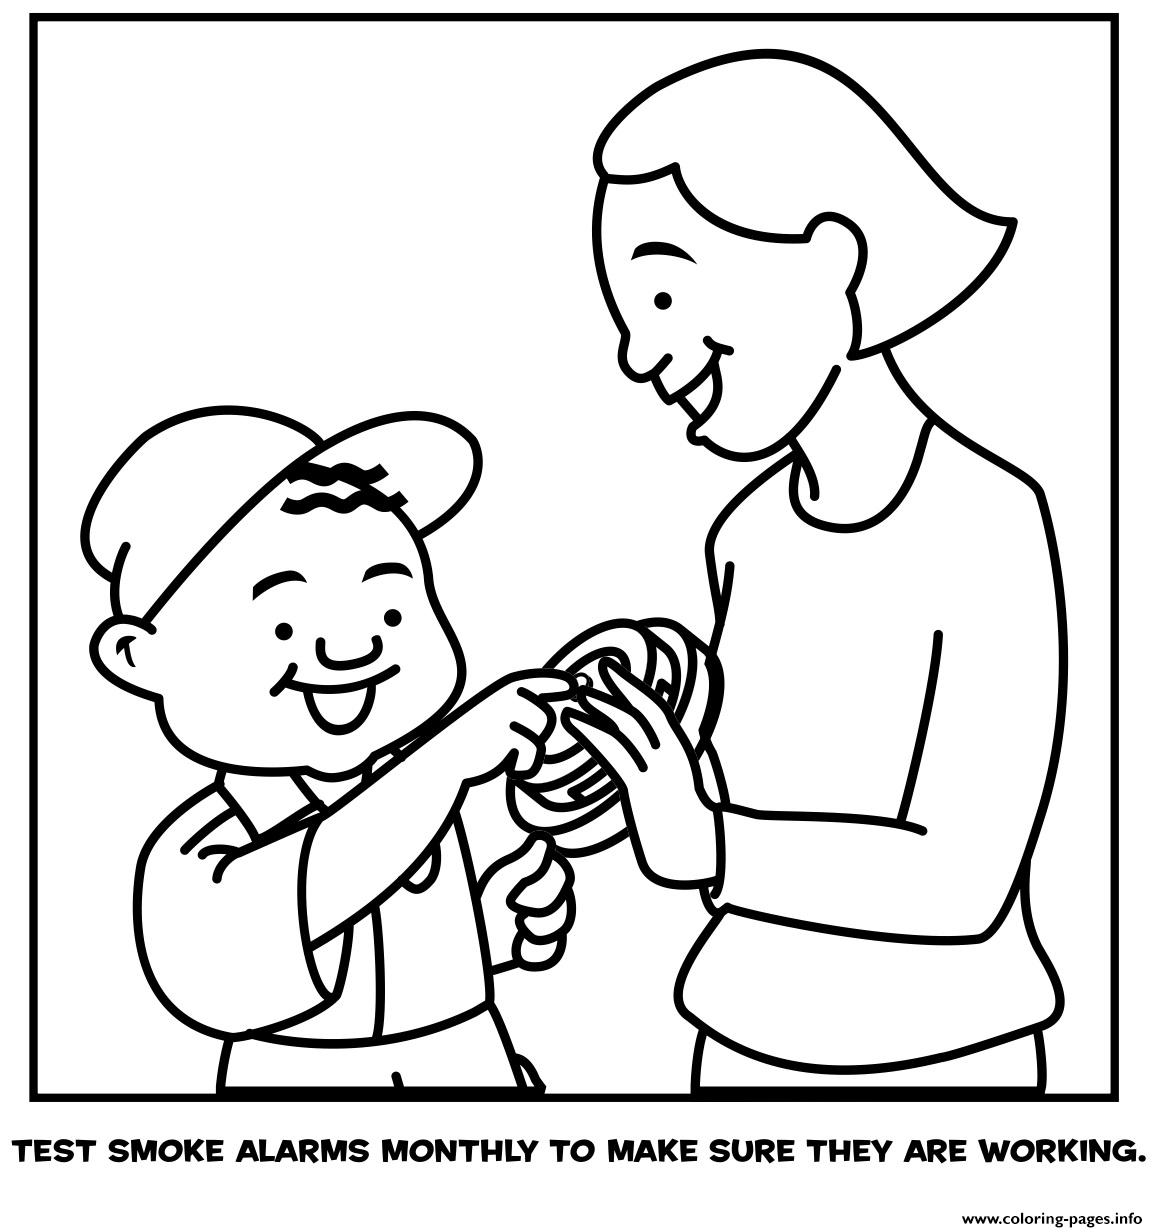 Test Smoke Alarms Monthly To Make Sure They Are Working coloring